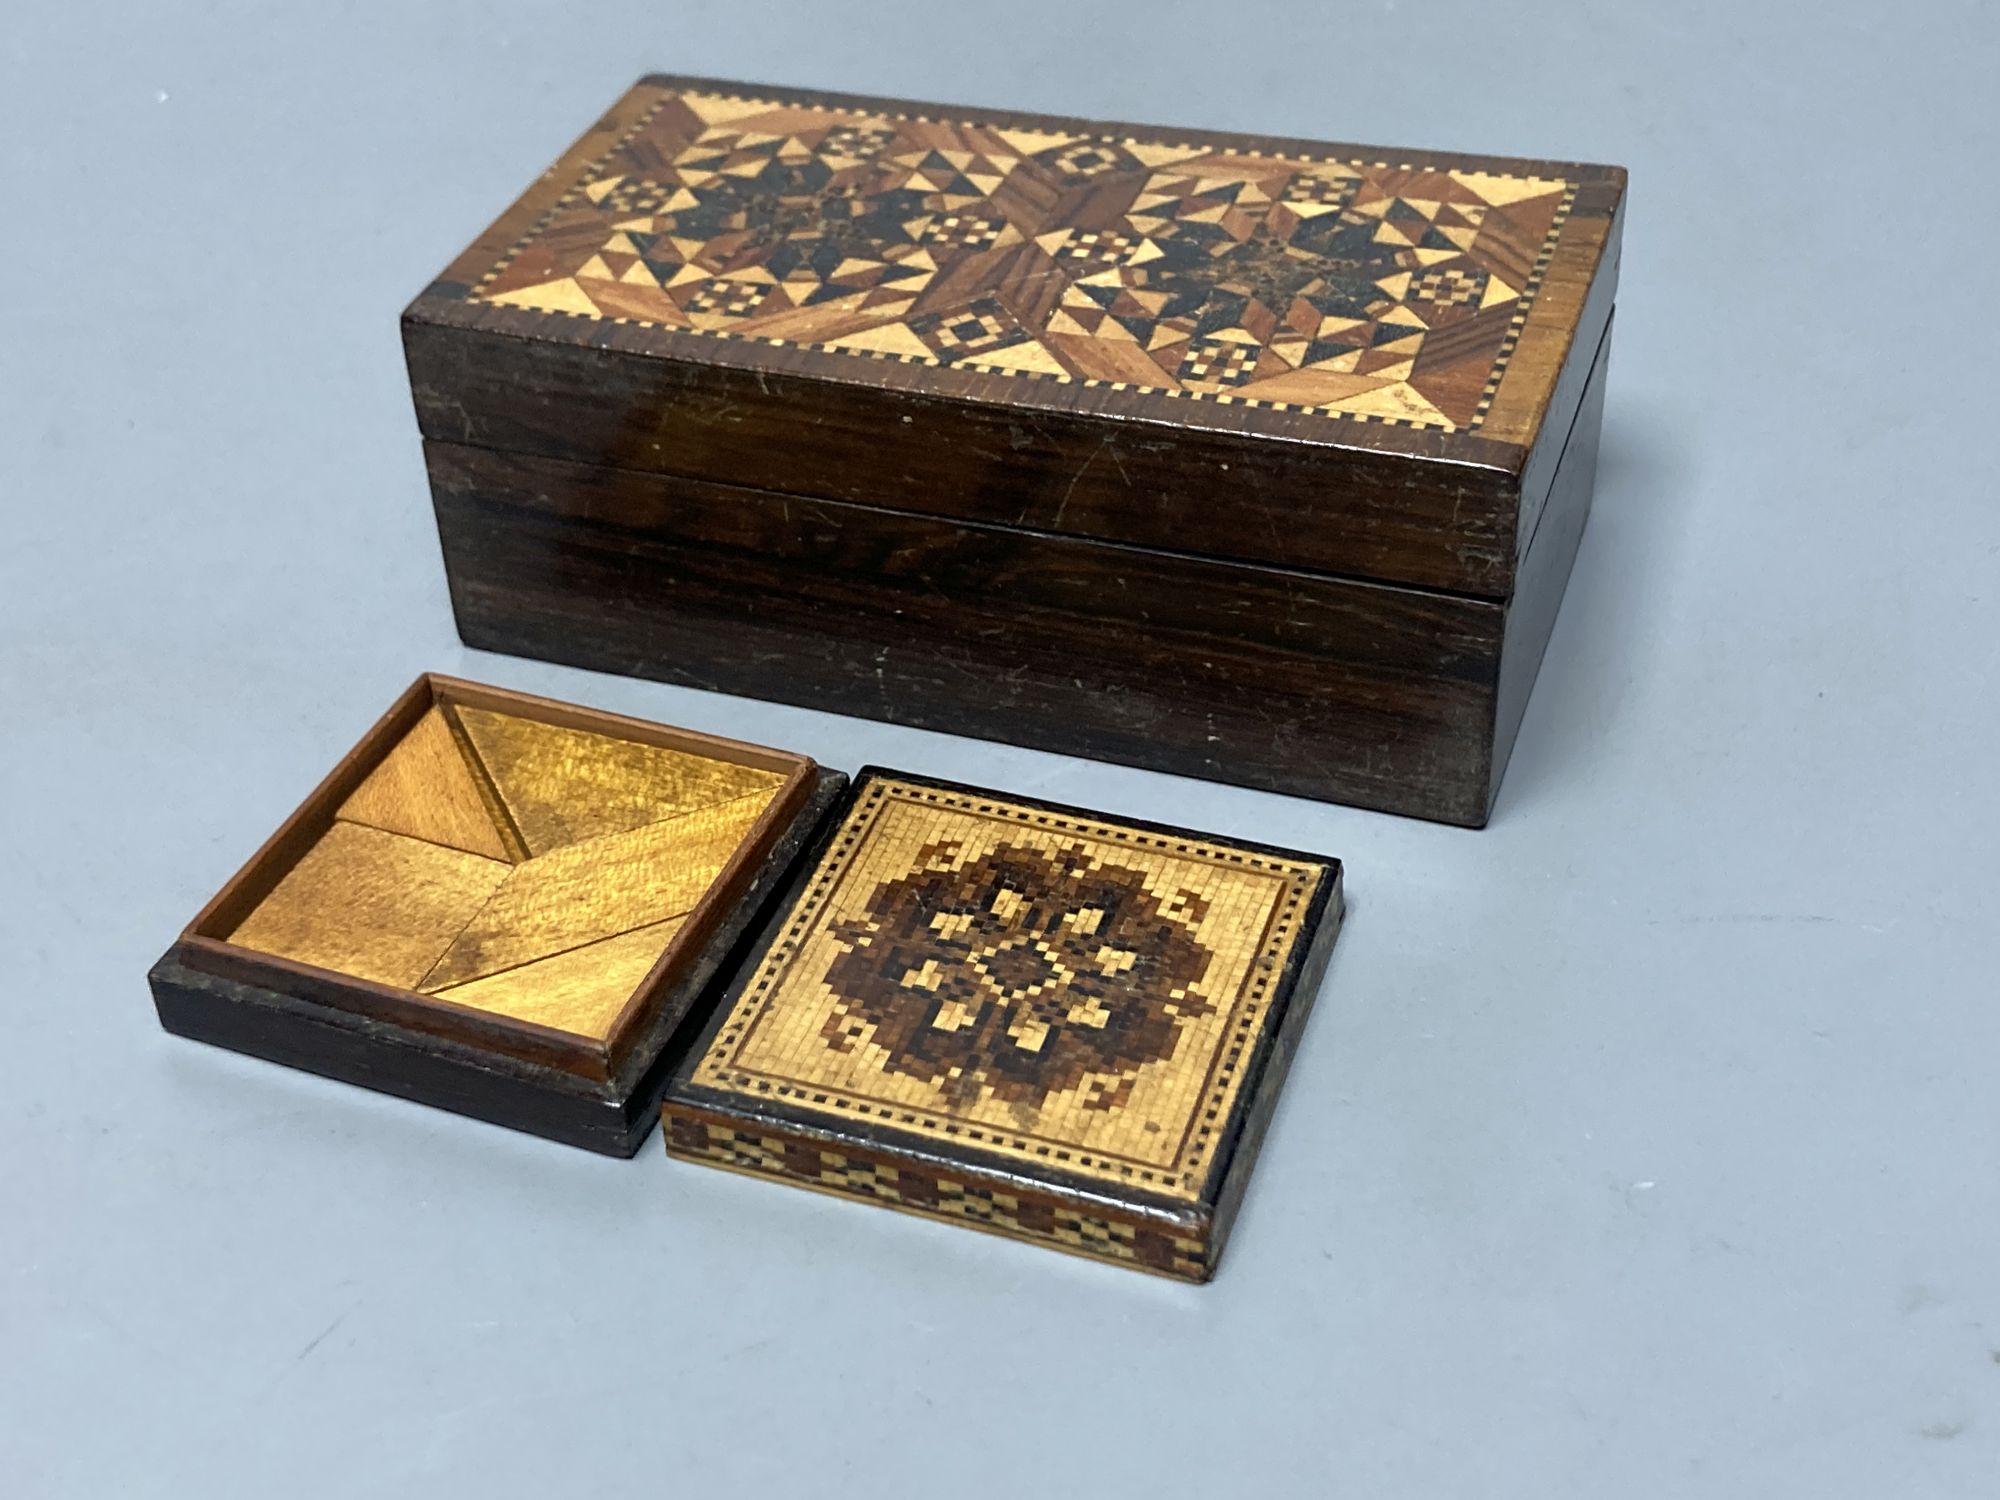 A Tunbridge ware mosaic lidded tangram puzzle and a half square mosaic box with inner tray, mid 19th century, 5cm and 11.6cm (2)